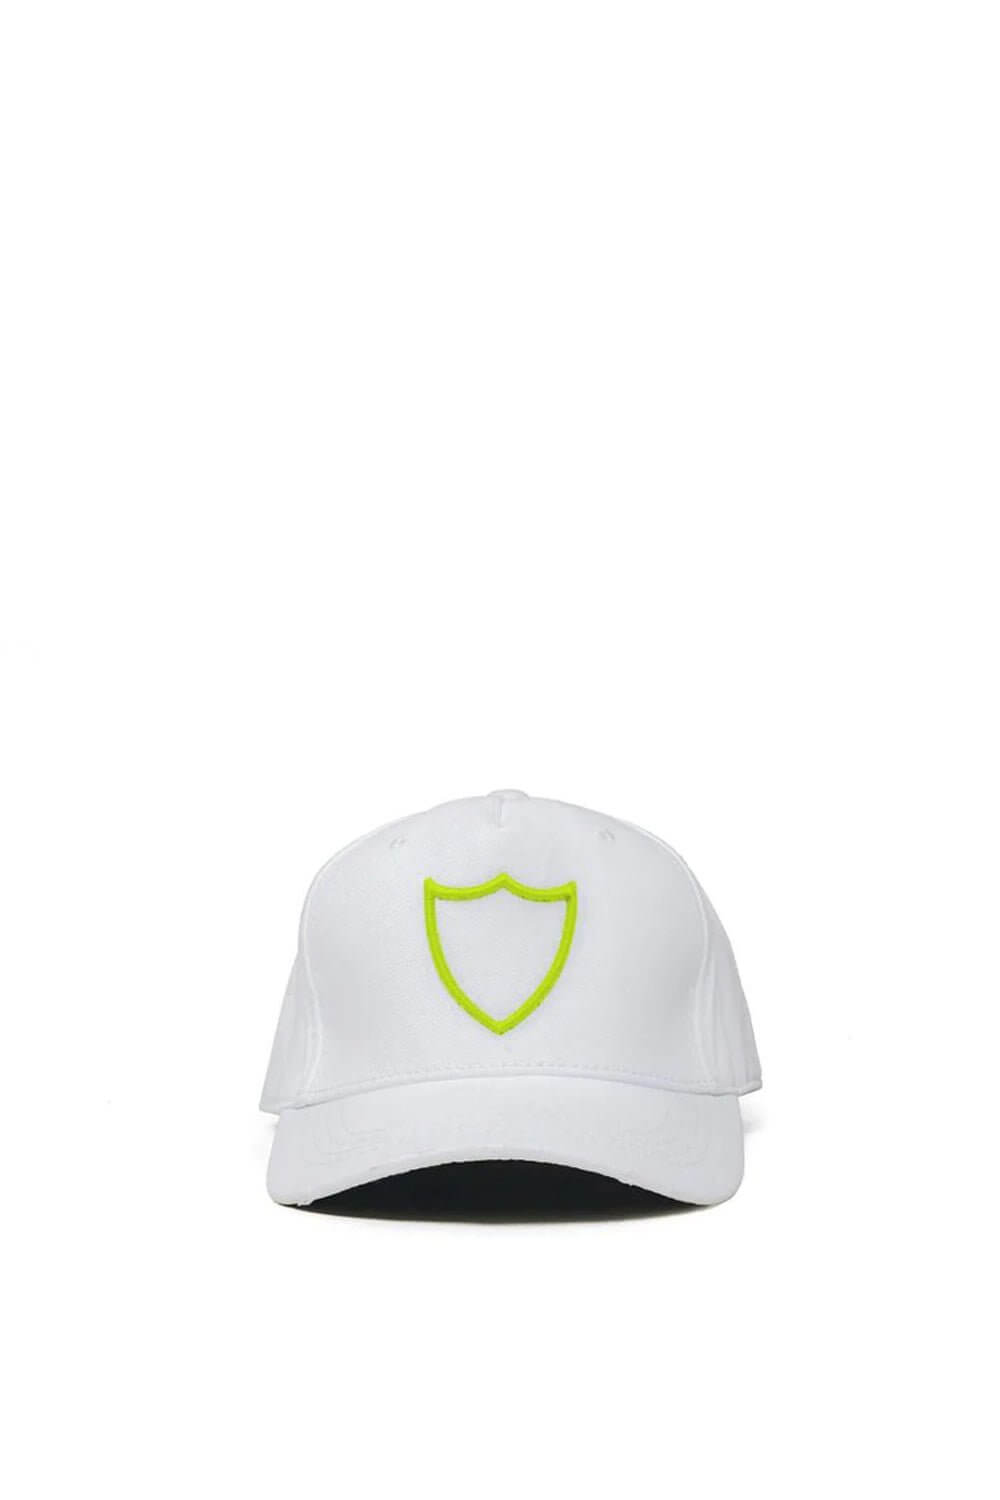 HTC LOGO BASEBALL CAP White baseball cap with preformed peak, round crown with eyelets, fluo yellow HTC Los Angeles shield logo embroidered on the front, adjustable strap on the back. One size fits all. 100% cotton. HTC LOS ANGELES